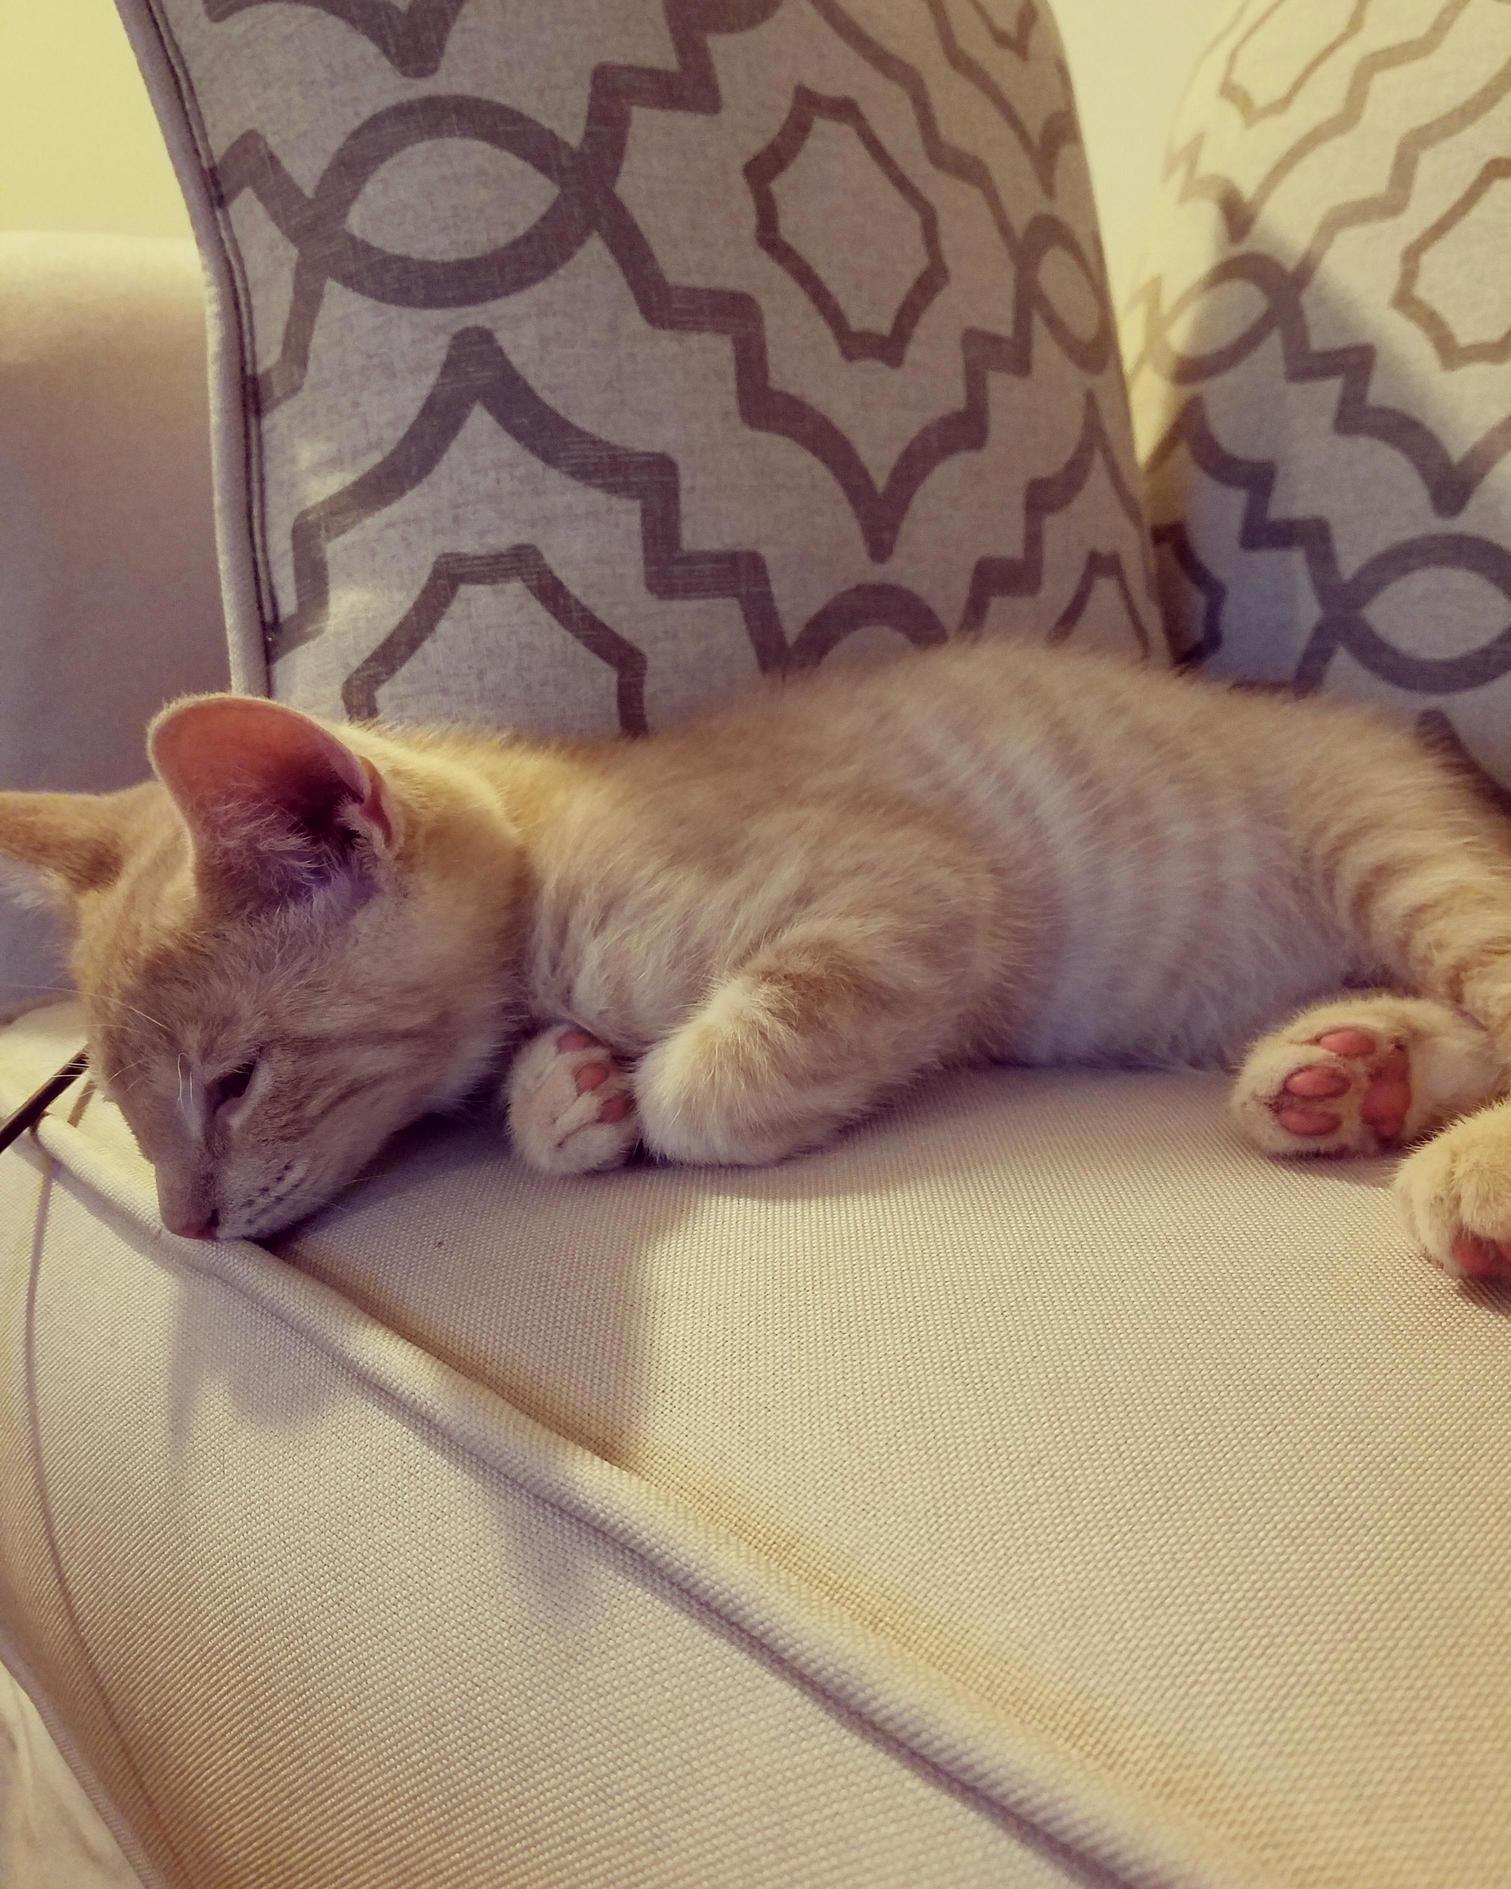 After 4 hours, this little spaz has almost worn himself out. everyone, i introduce to you my sleepy new kitten, church.